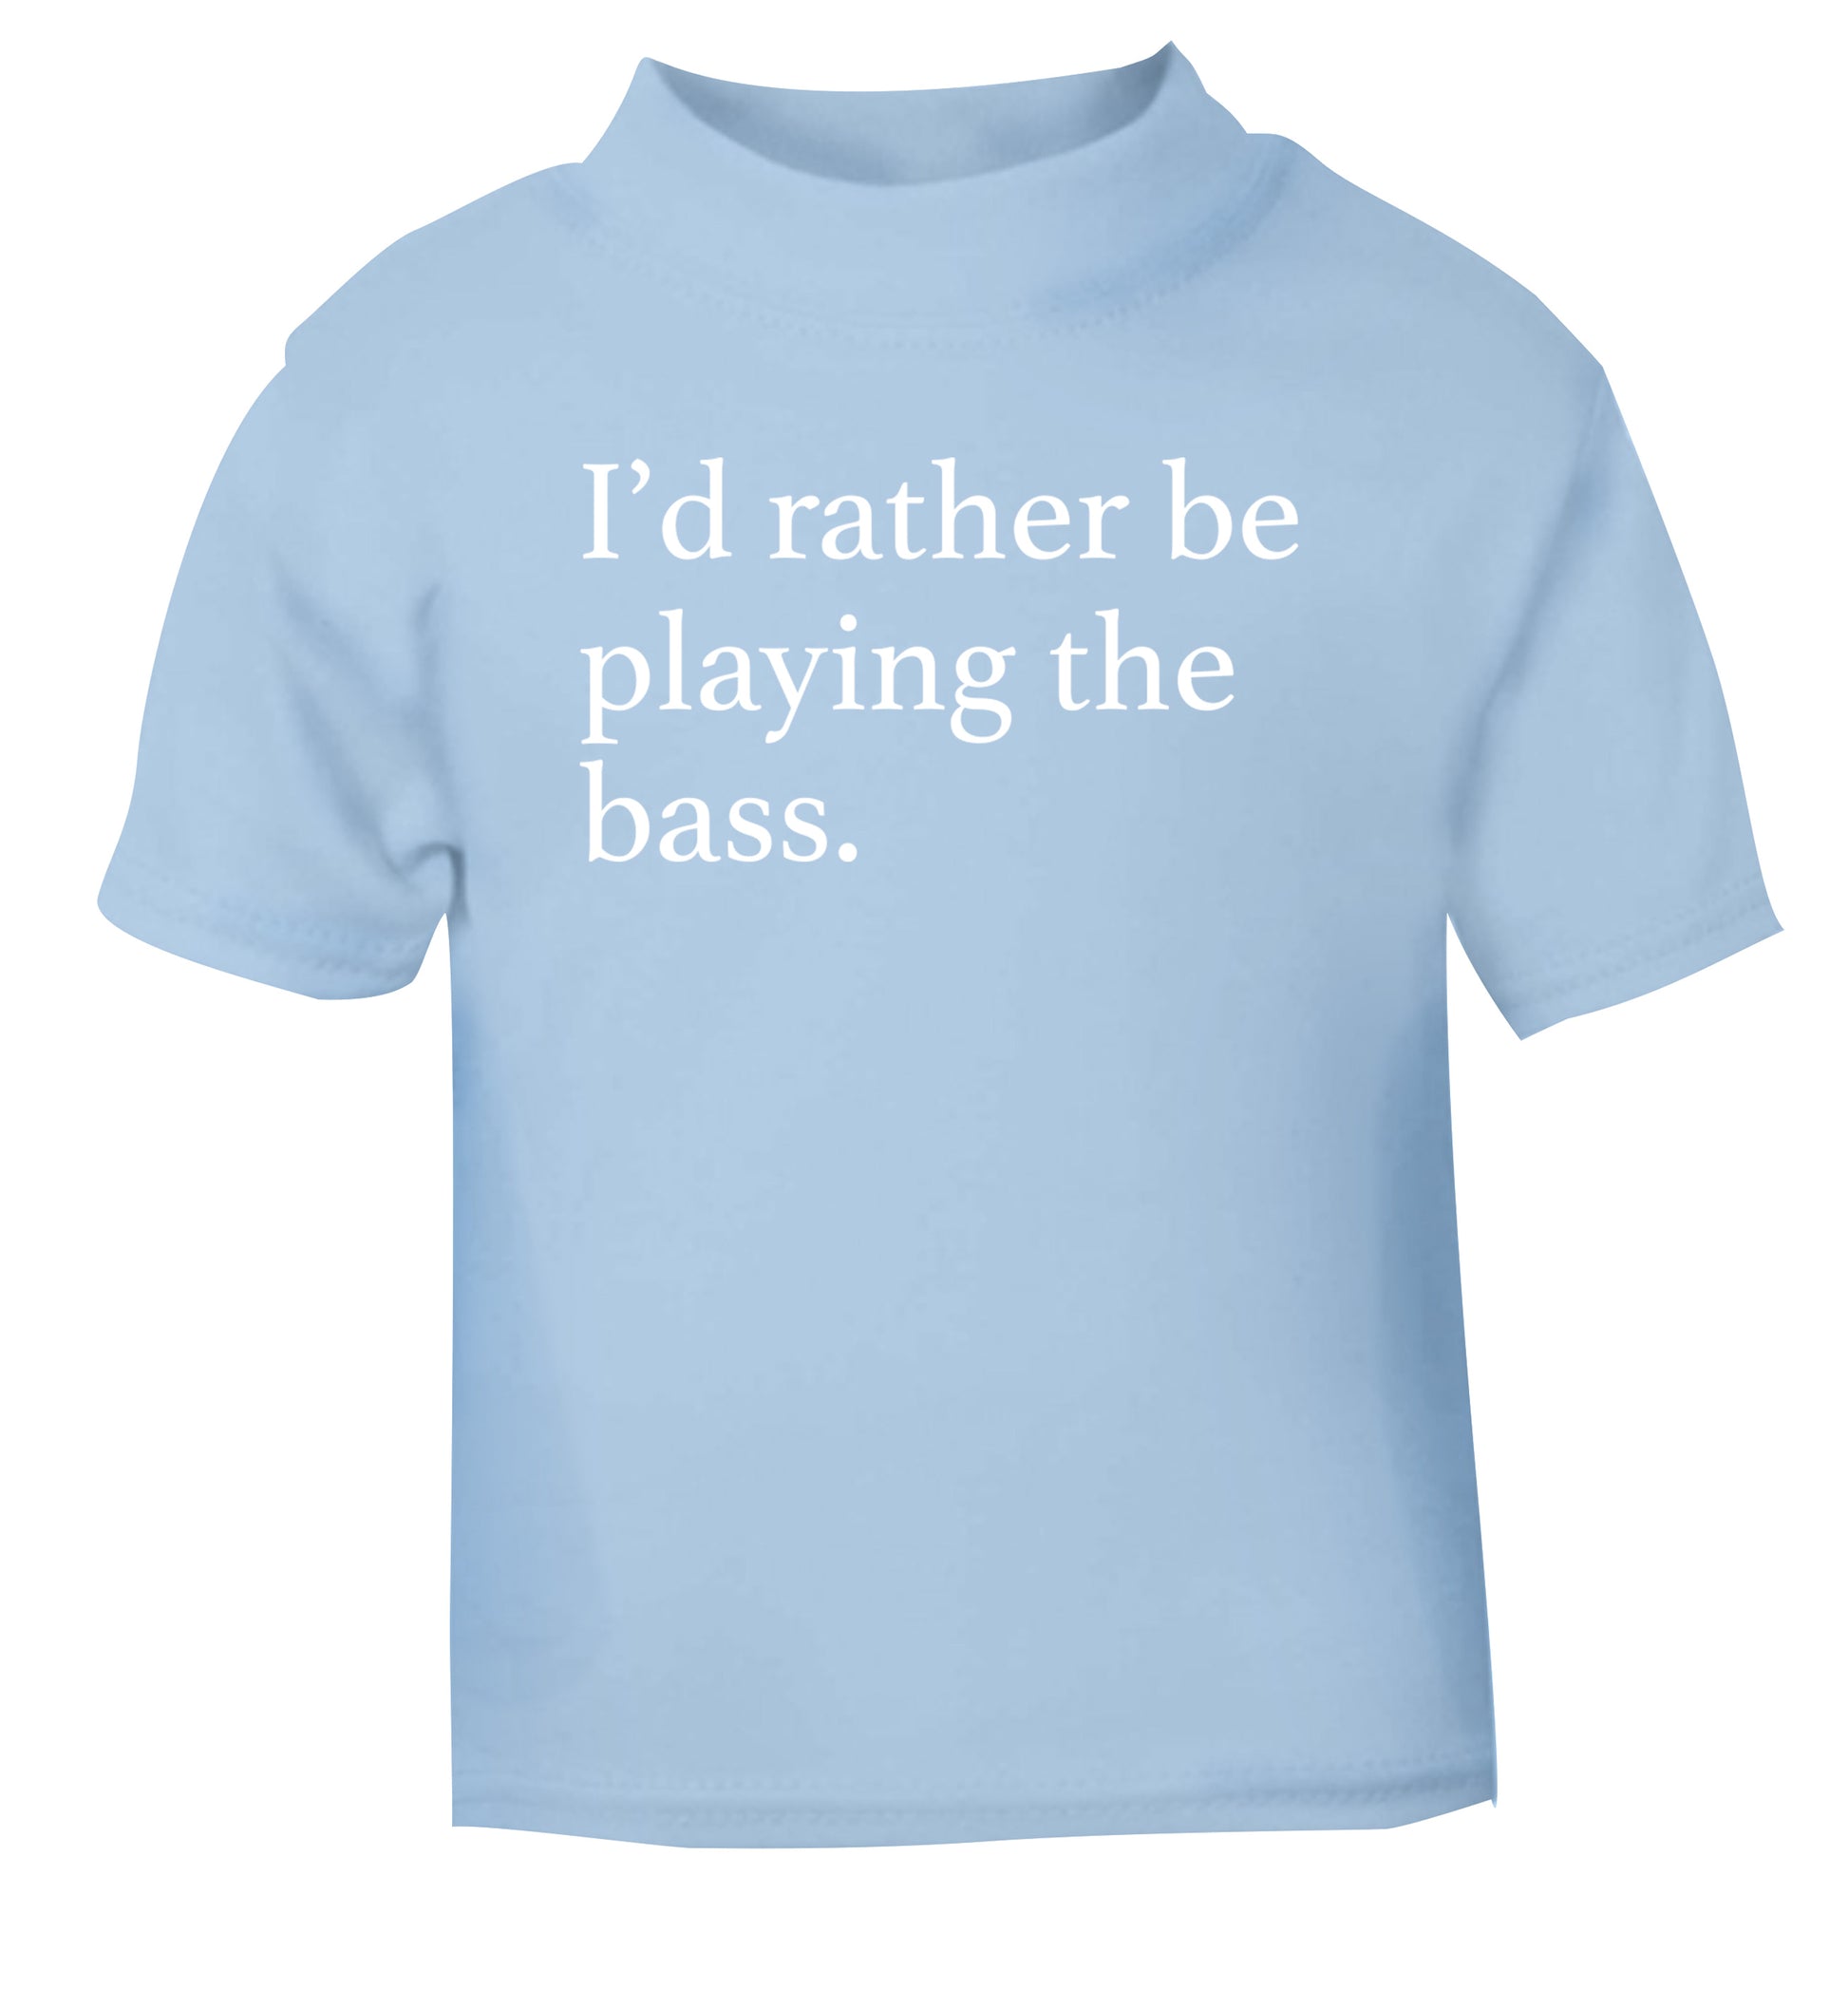 I'd rather by playing the bass light blue Baby Toddler Tshirt 2 Years